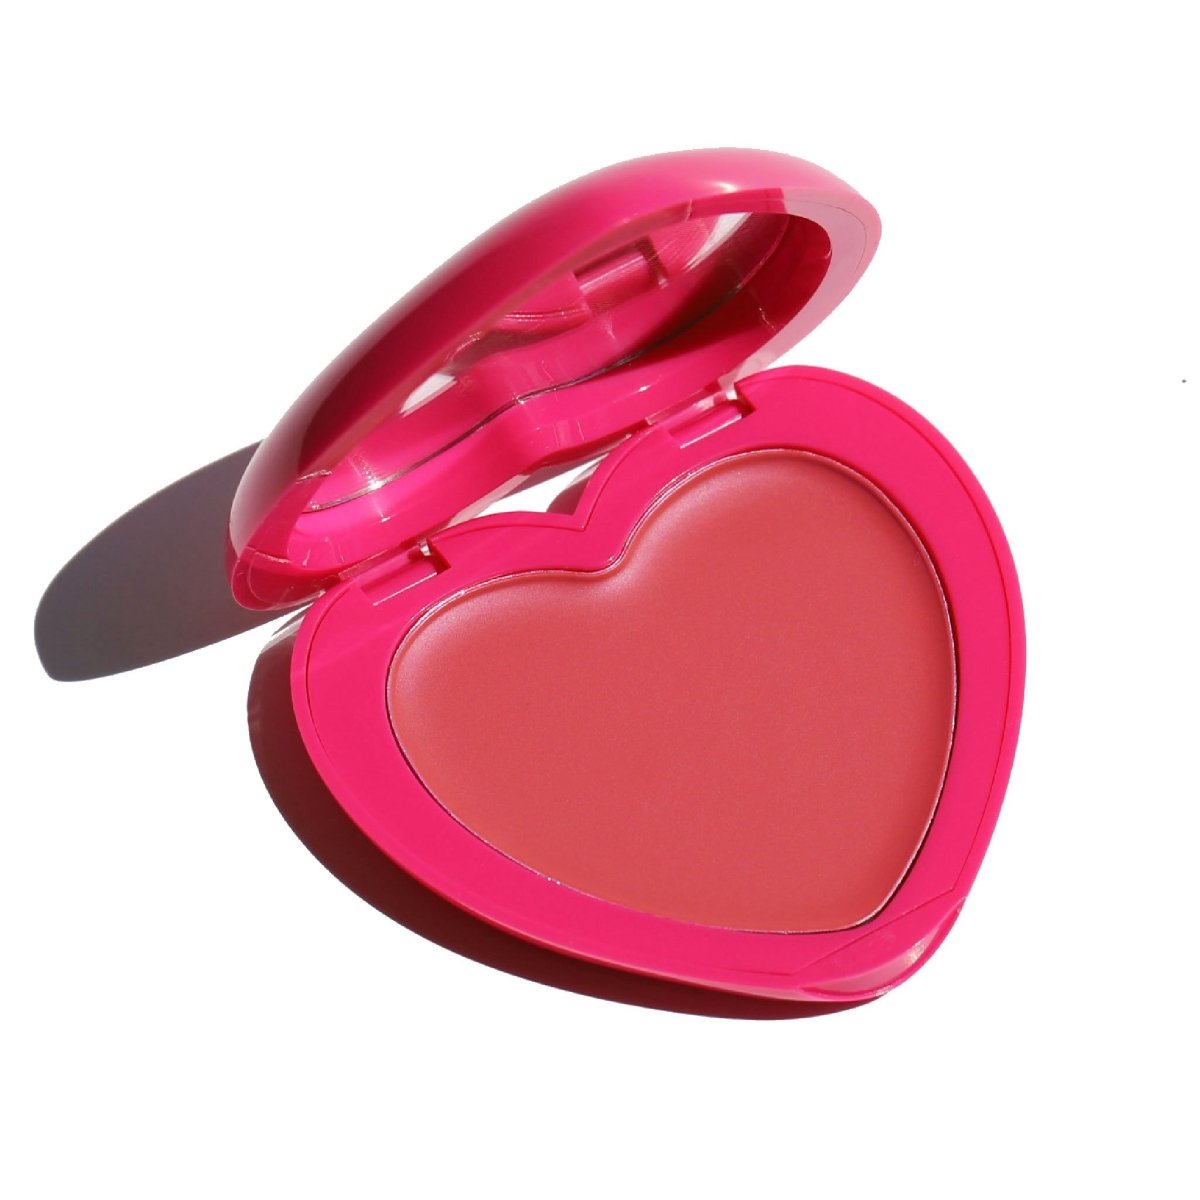 open pink heart shaped compact with mirror and peach pan - candy paint cheek + lip tint, disco lemonade - half caked makeup